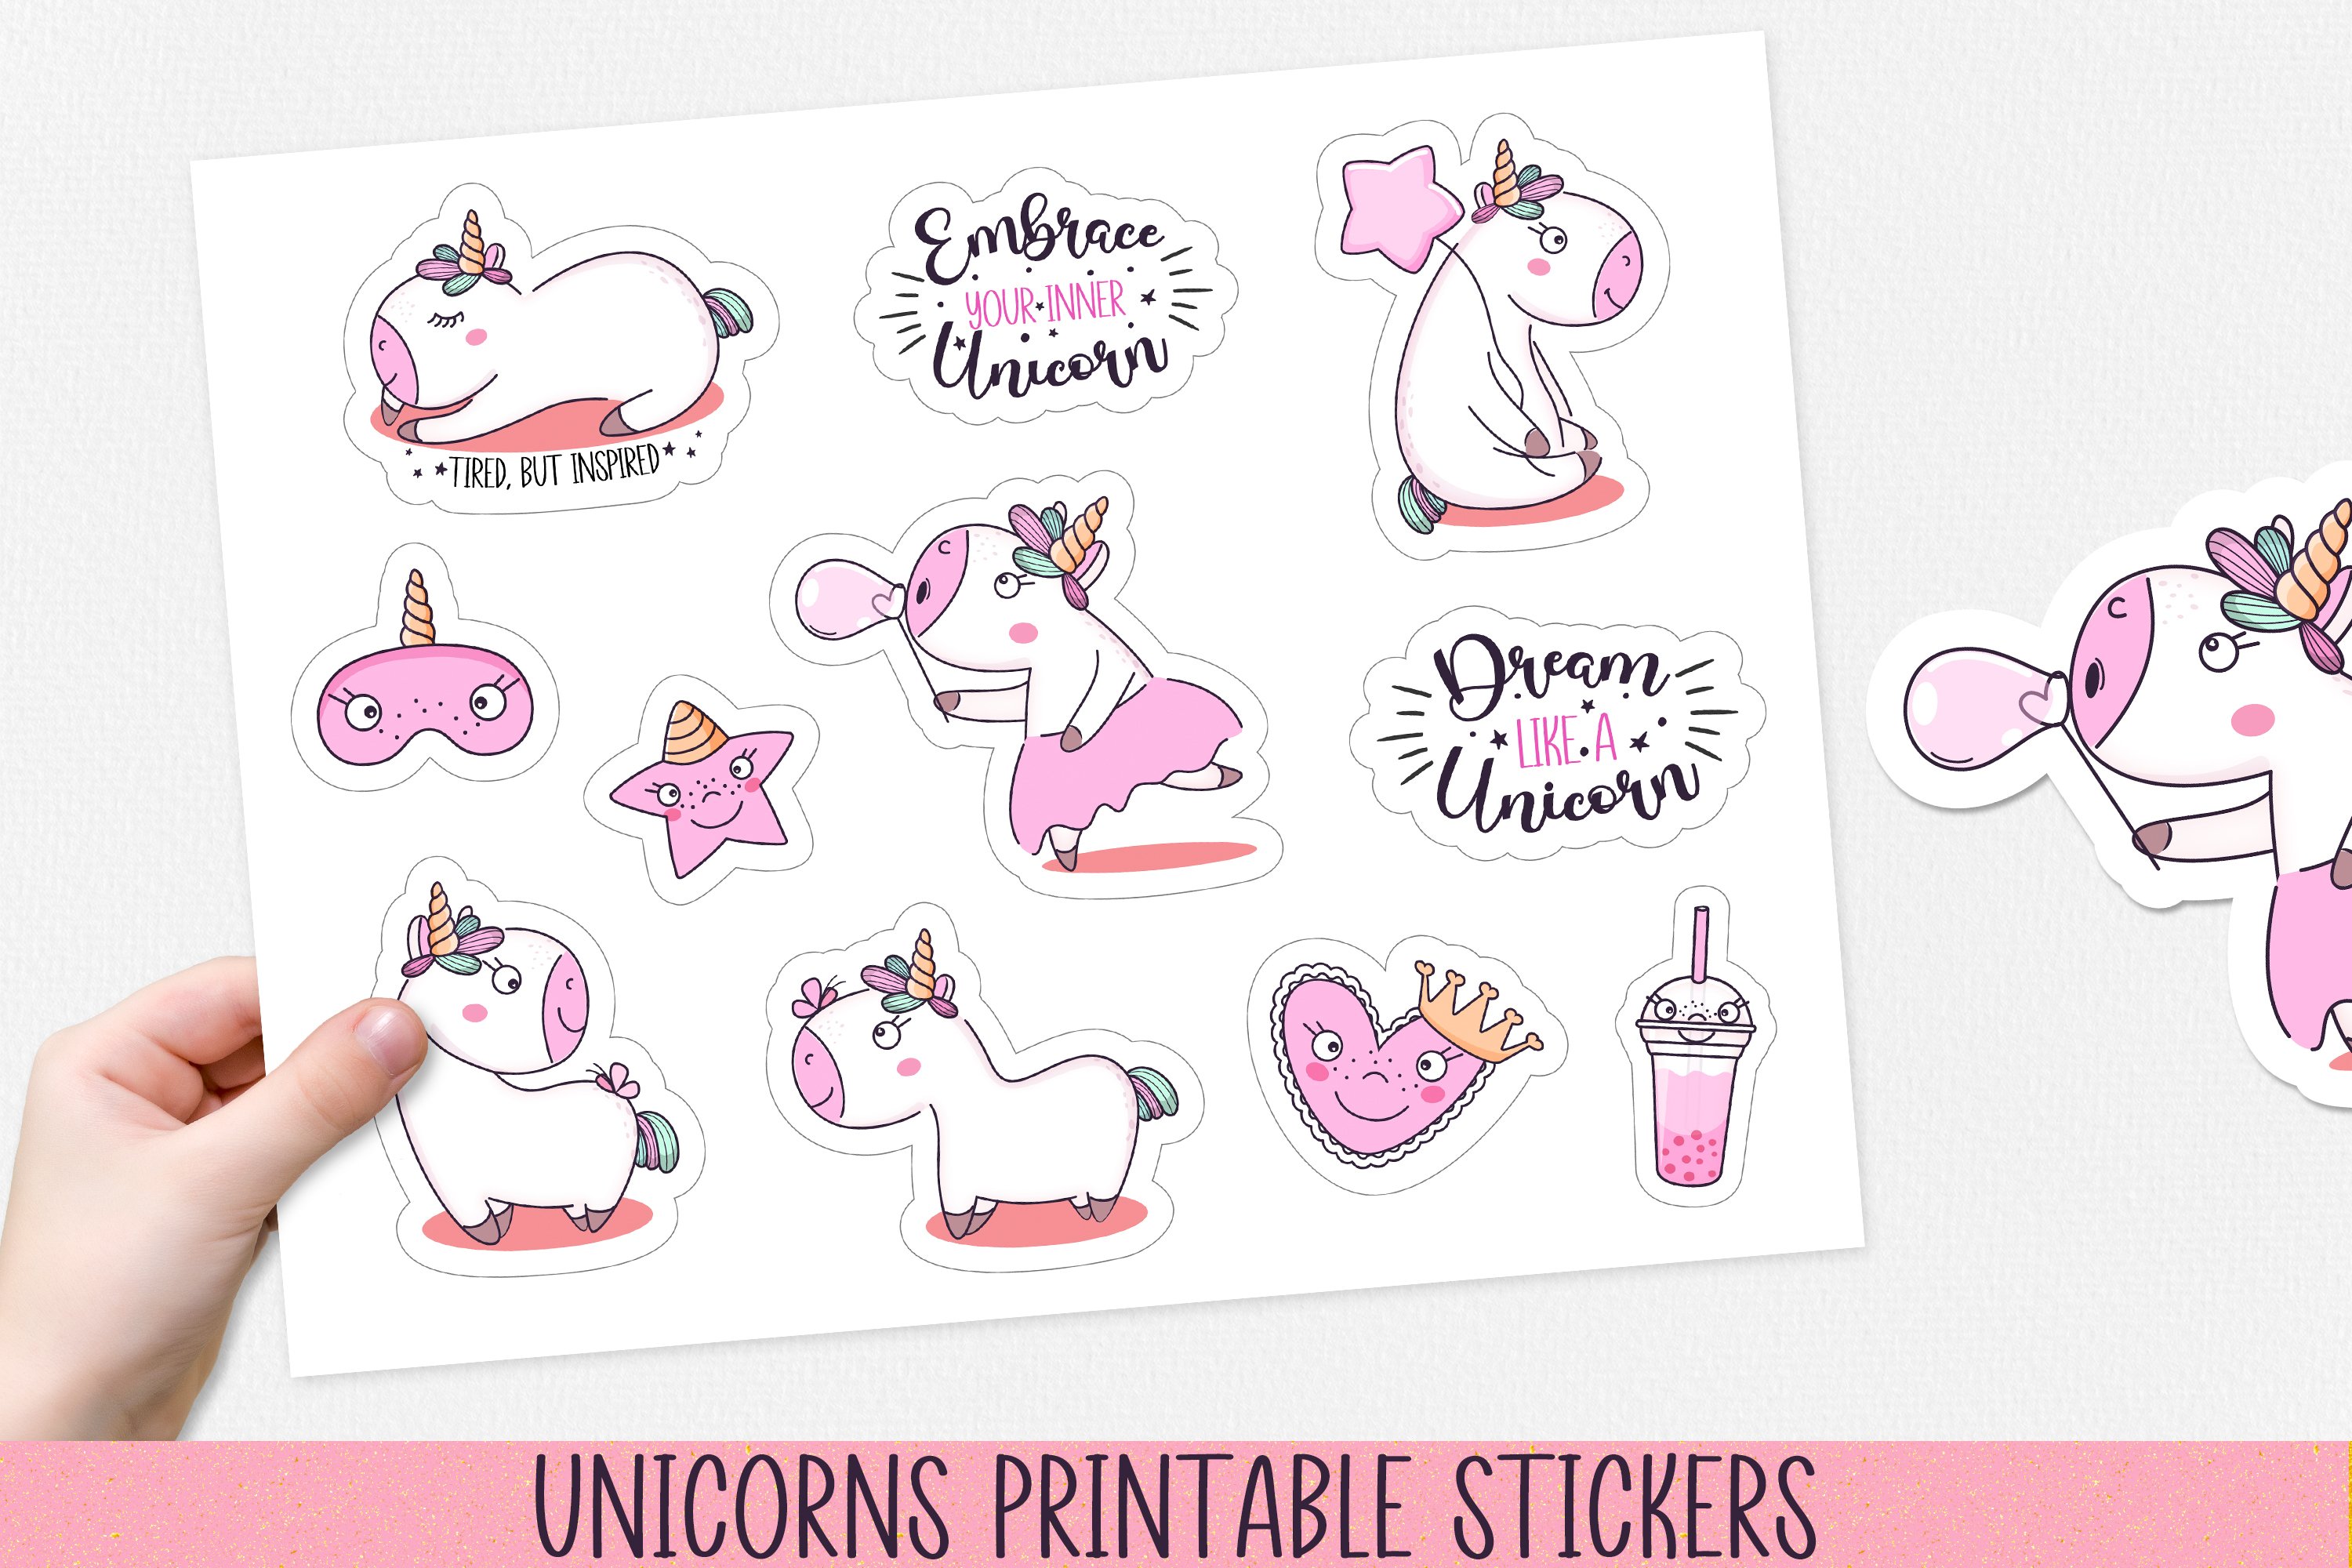 Paper with unicorn stickers.